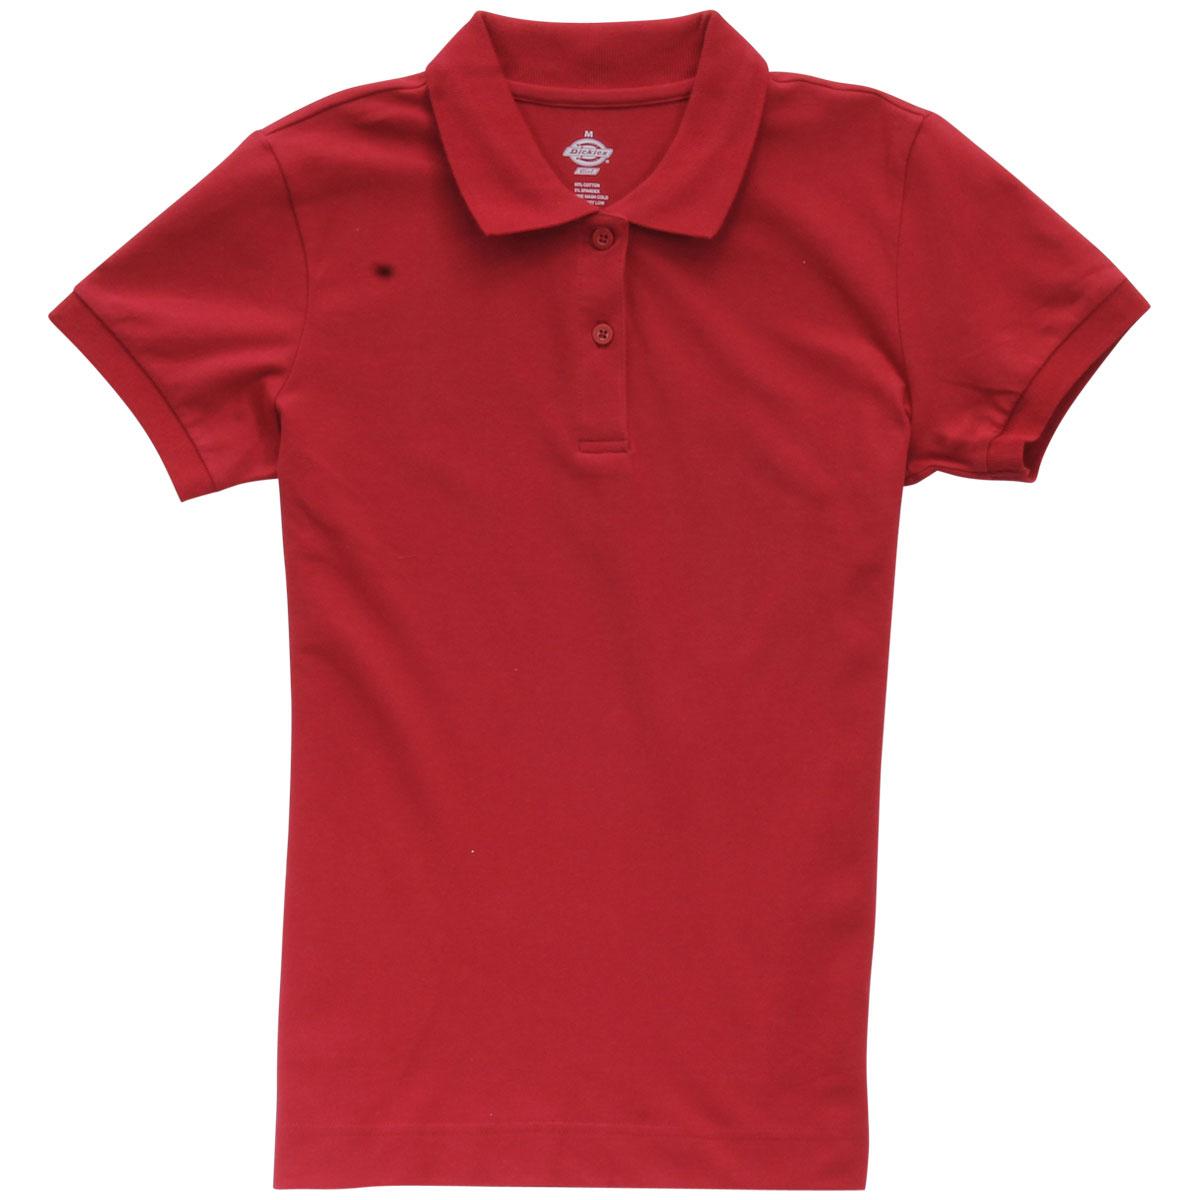 Dickies Girl Junior's 2 Button Short Sleeve Stretch Pique Polo Shirt - Red - Large